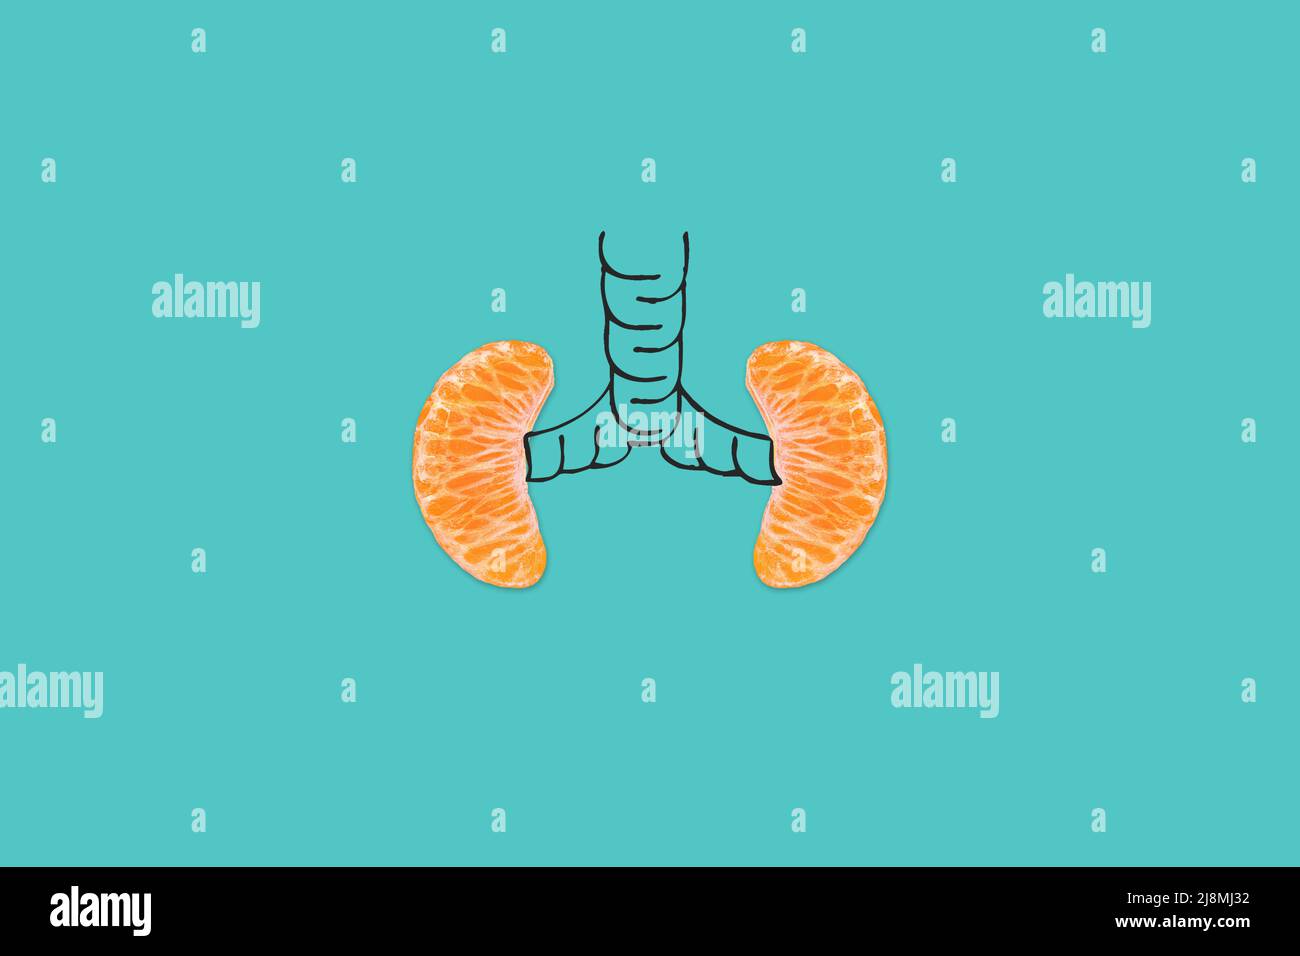 A health concept of the unhealthy human lungs of a smoker with lung cancer in the dark shadows, made of tangerine segments. Stock Photo